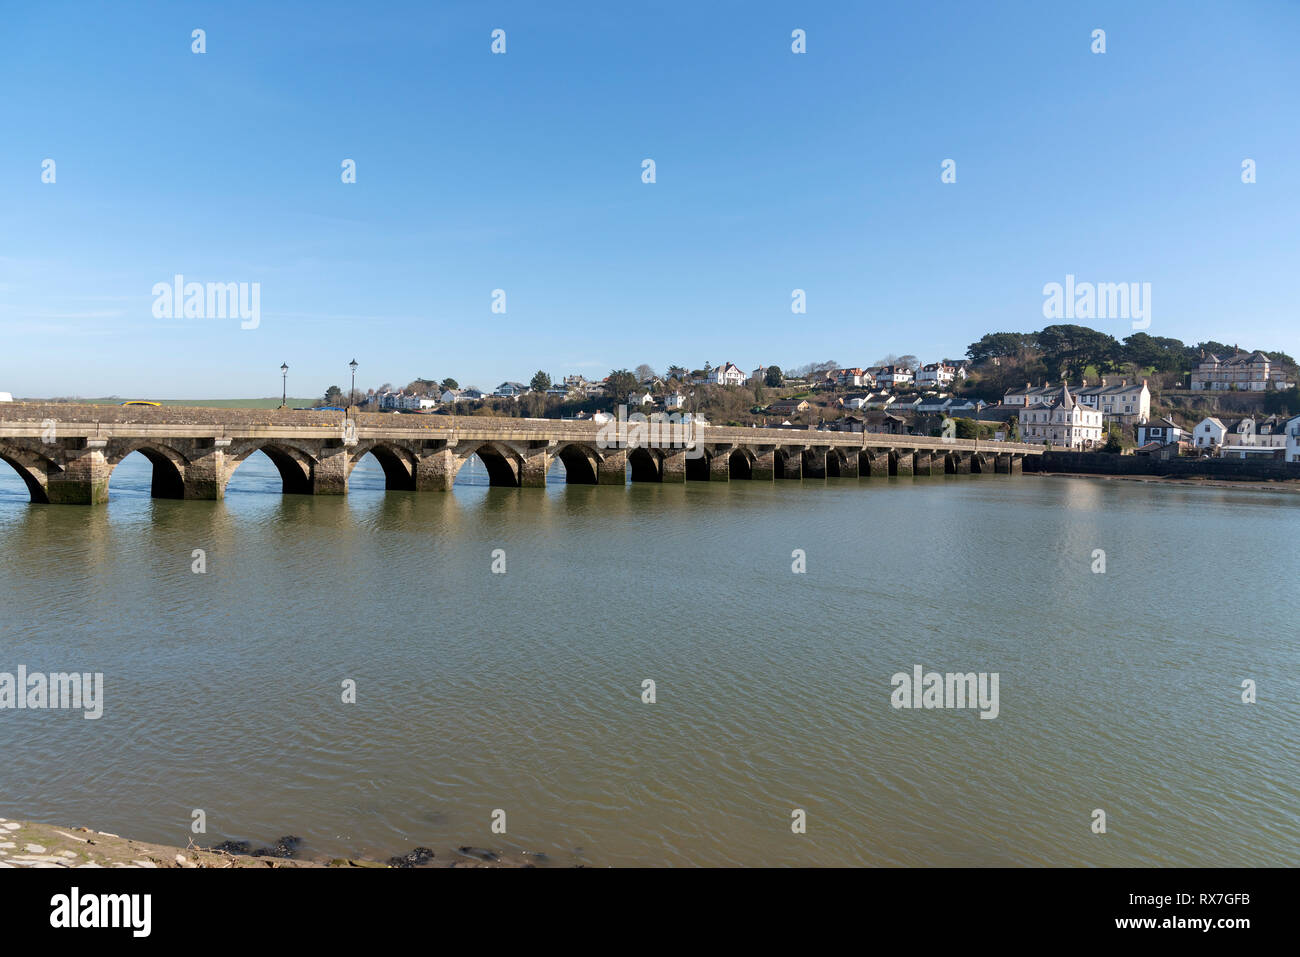 Bideford, North Devon, England UK. March 2019. Looking from Bideford town over the Bideford Long Bridge built in 1850 to East The Water. Stock Photo